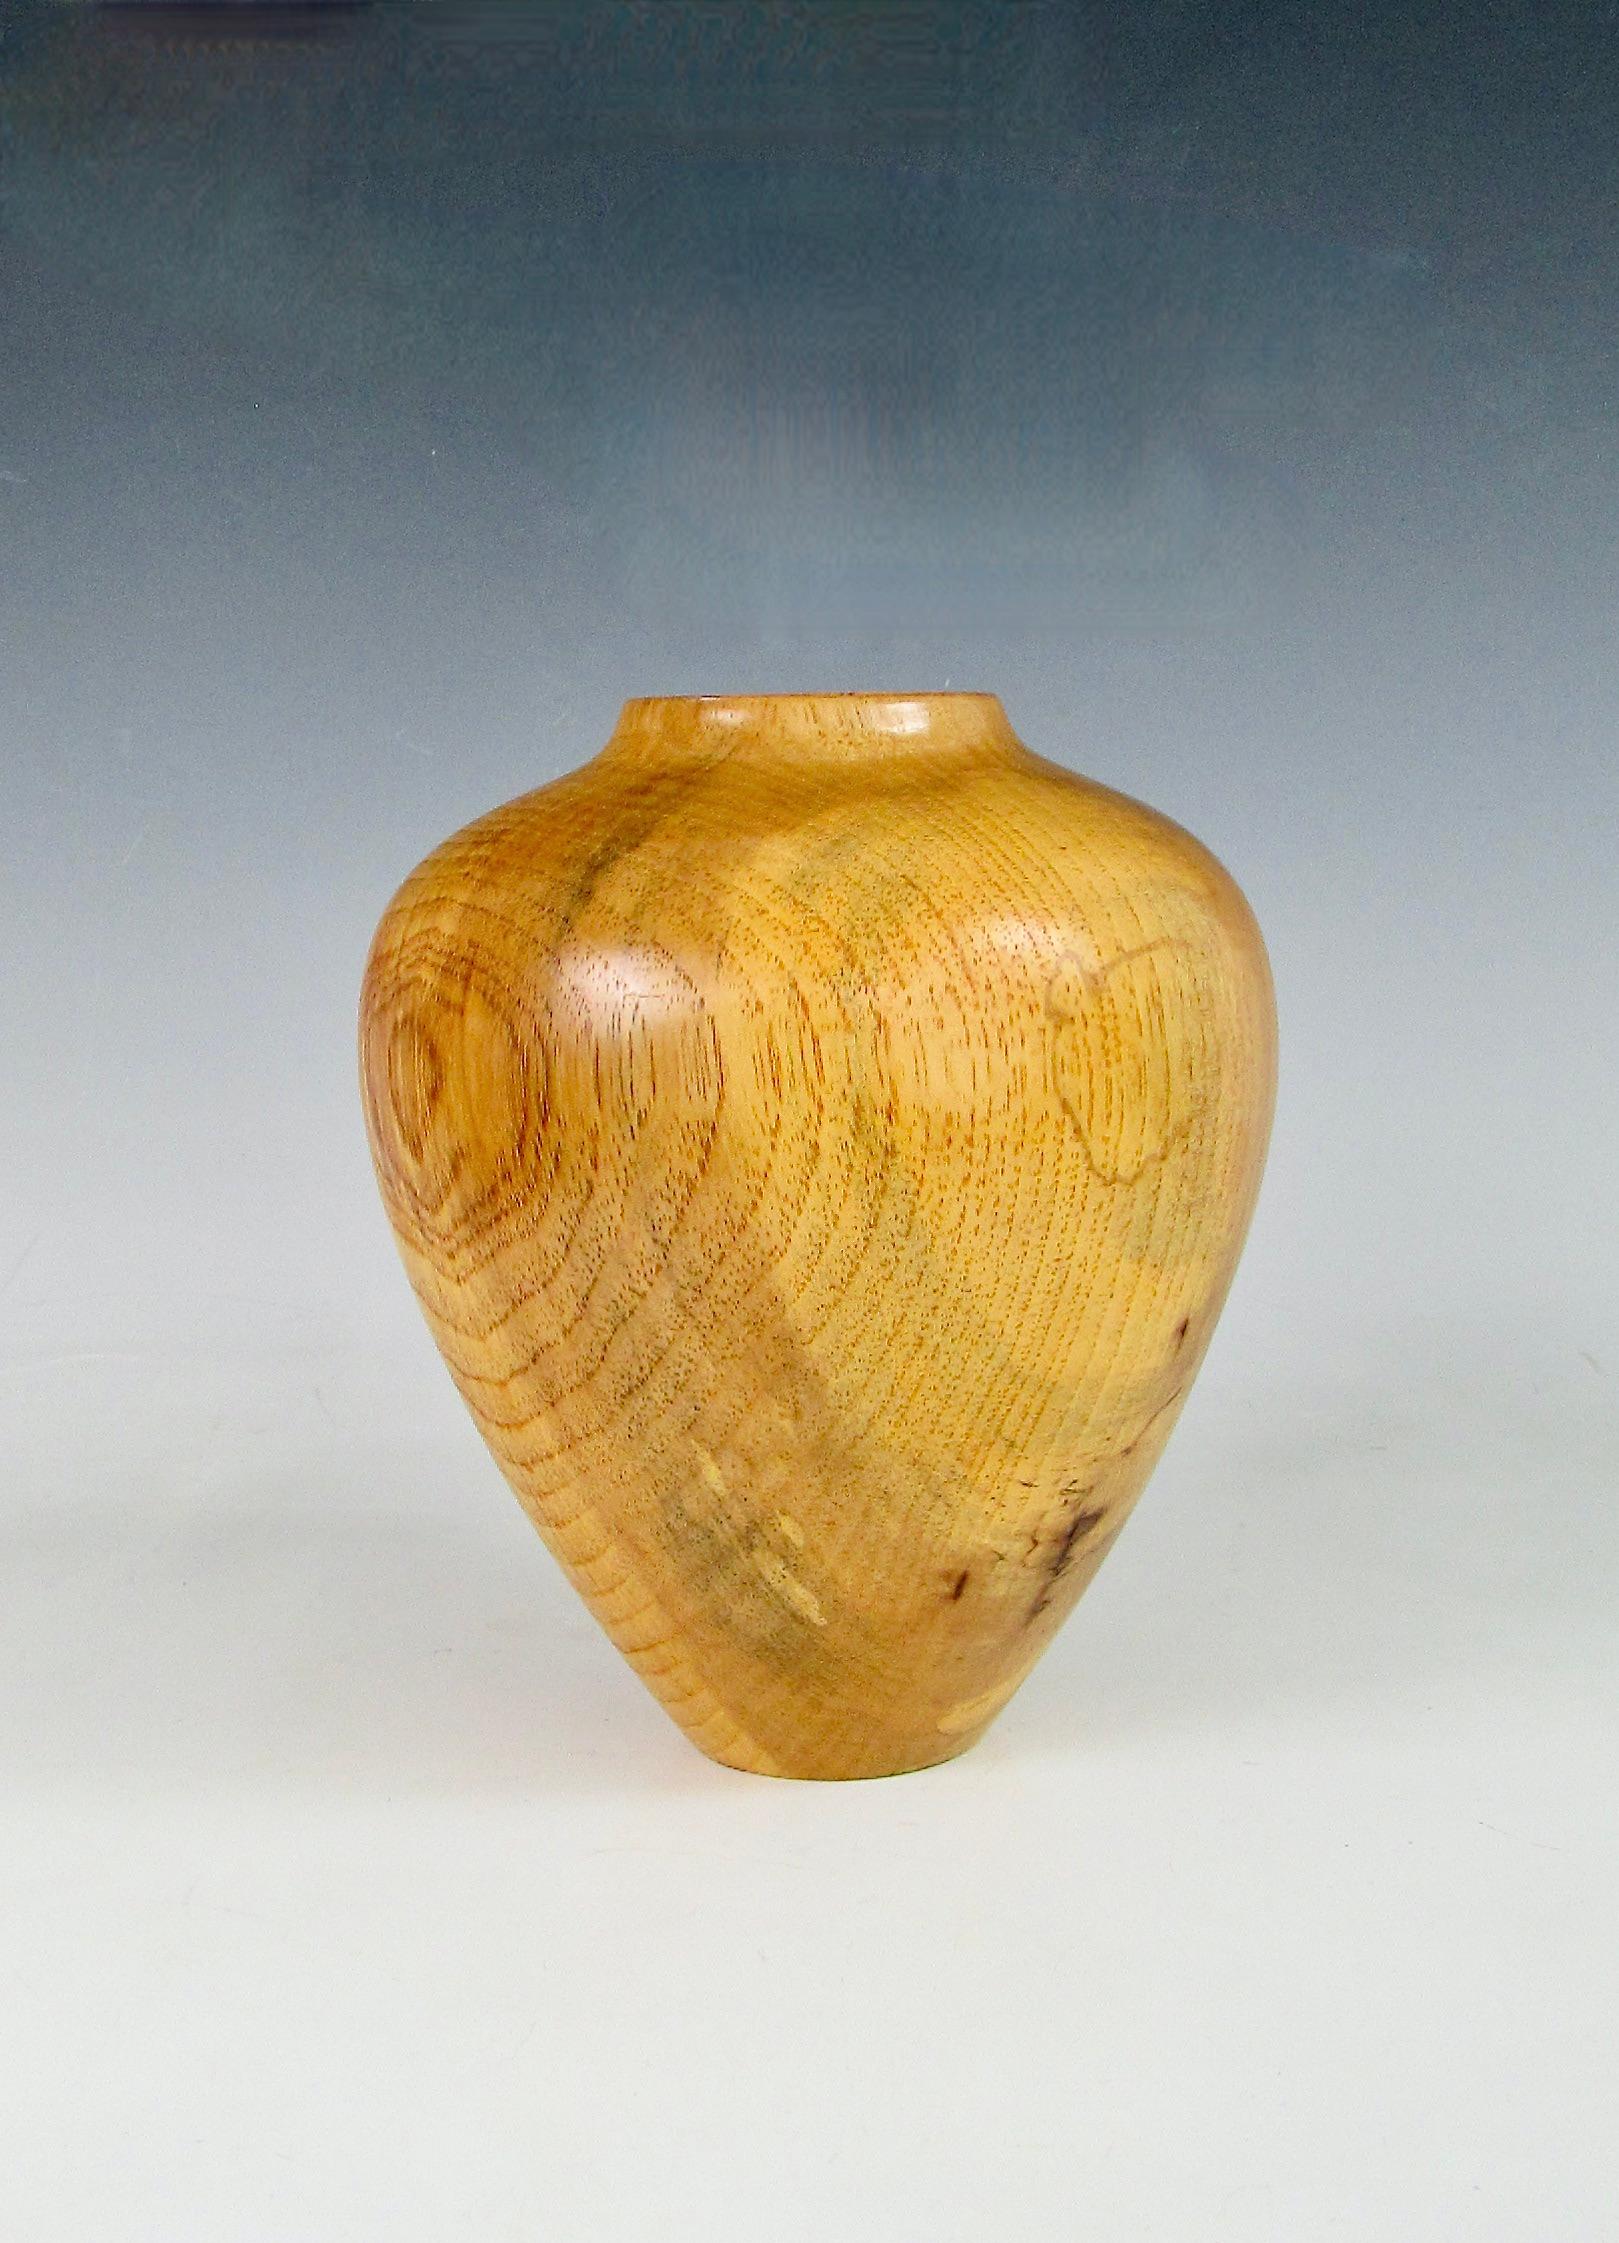 Turned Moulthrop era spalted pecan turned wood vessel by Alan Raelston   For Sale